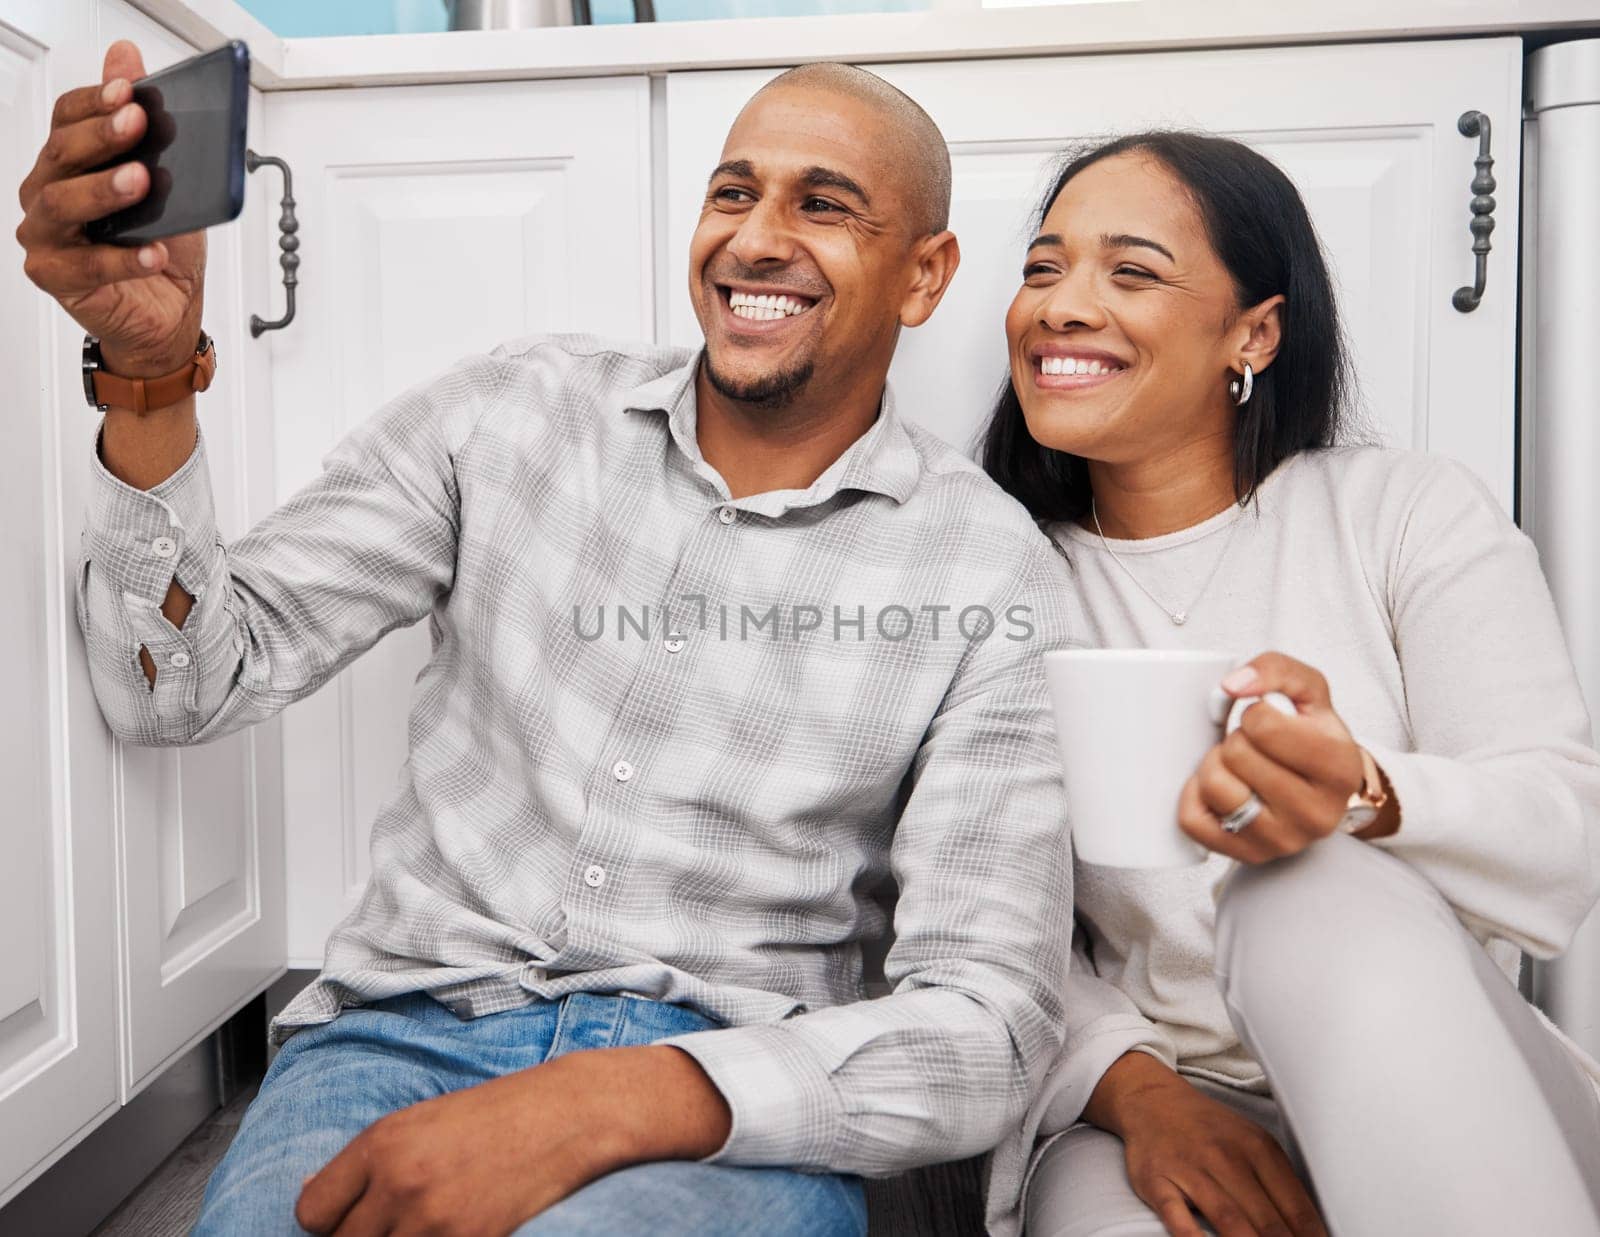 Selfie, black couple and morning in a kitchen happy about new real estate and property purchase. House, smile and happiness of young people together taking a social media profile photo for web app.